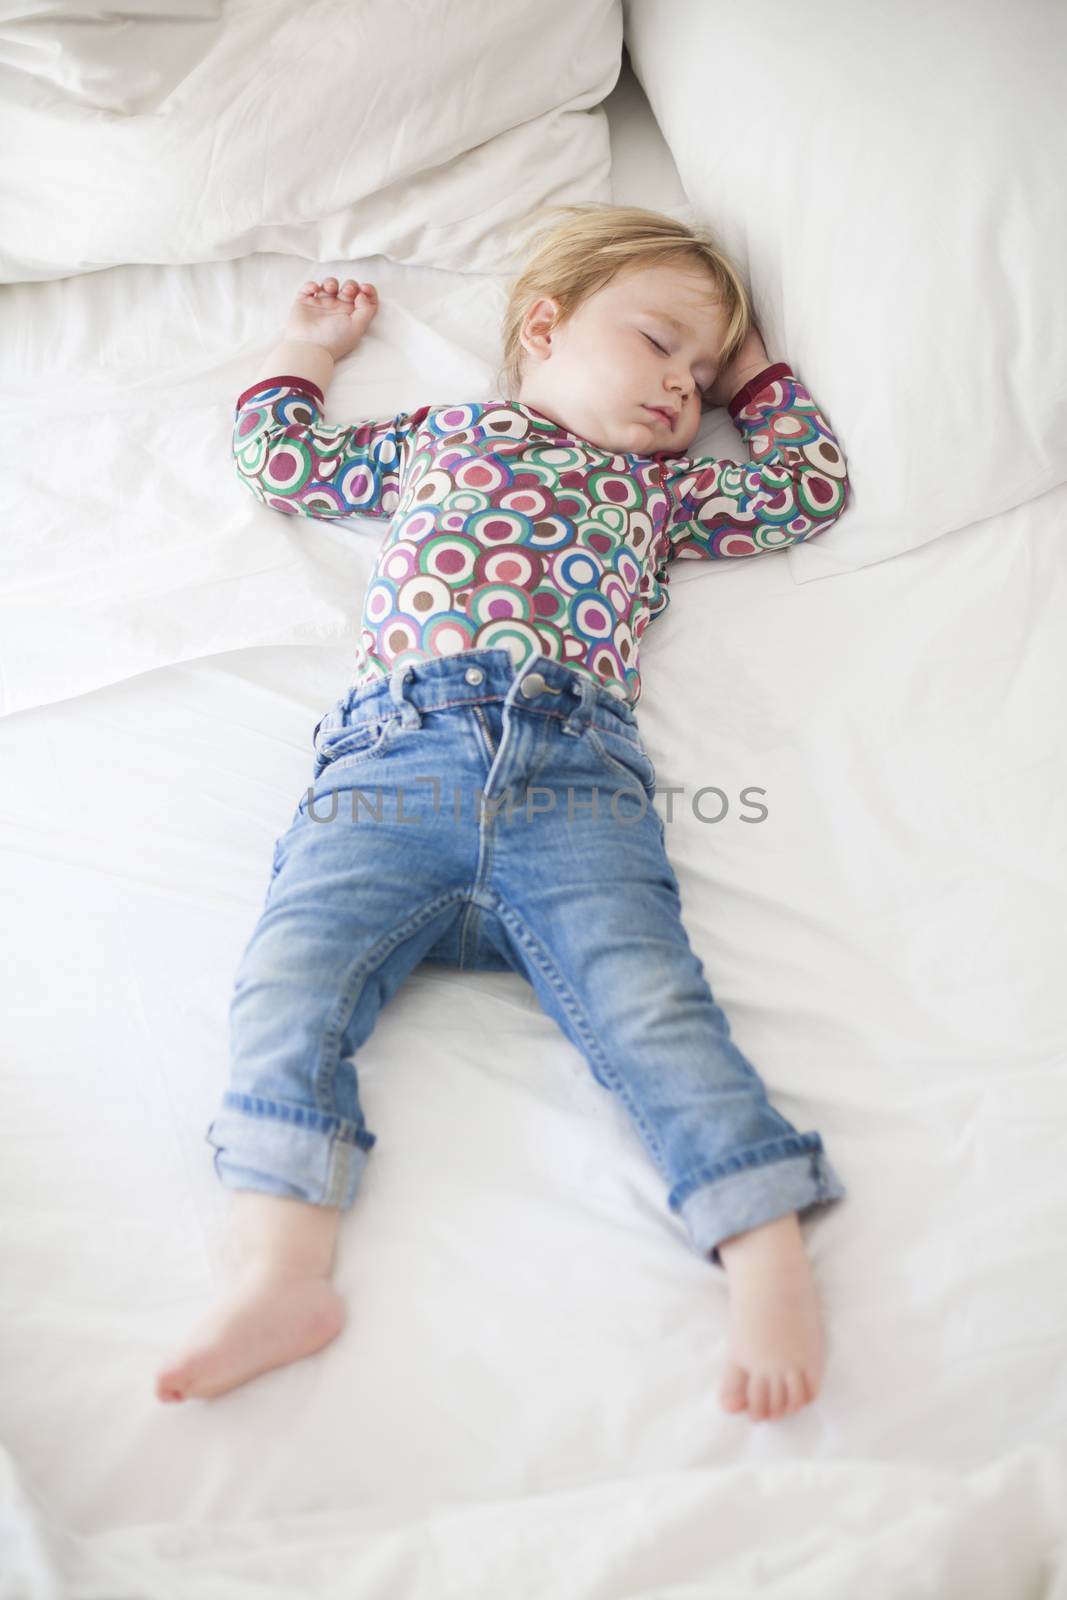 blonde caucasian baby face nineteen month age with colored shirt sleeping on white sheets king bed